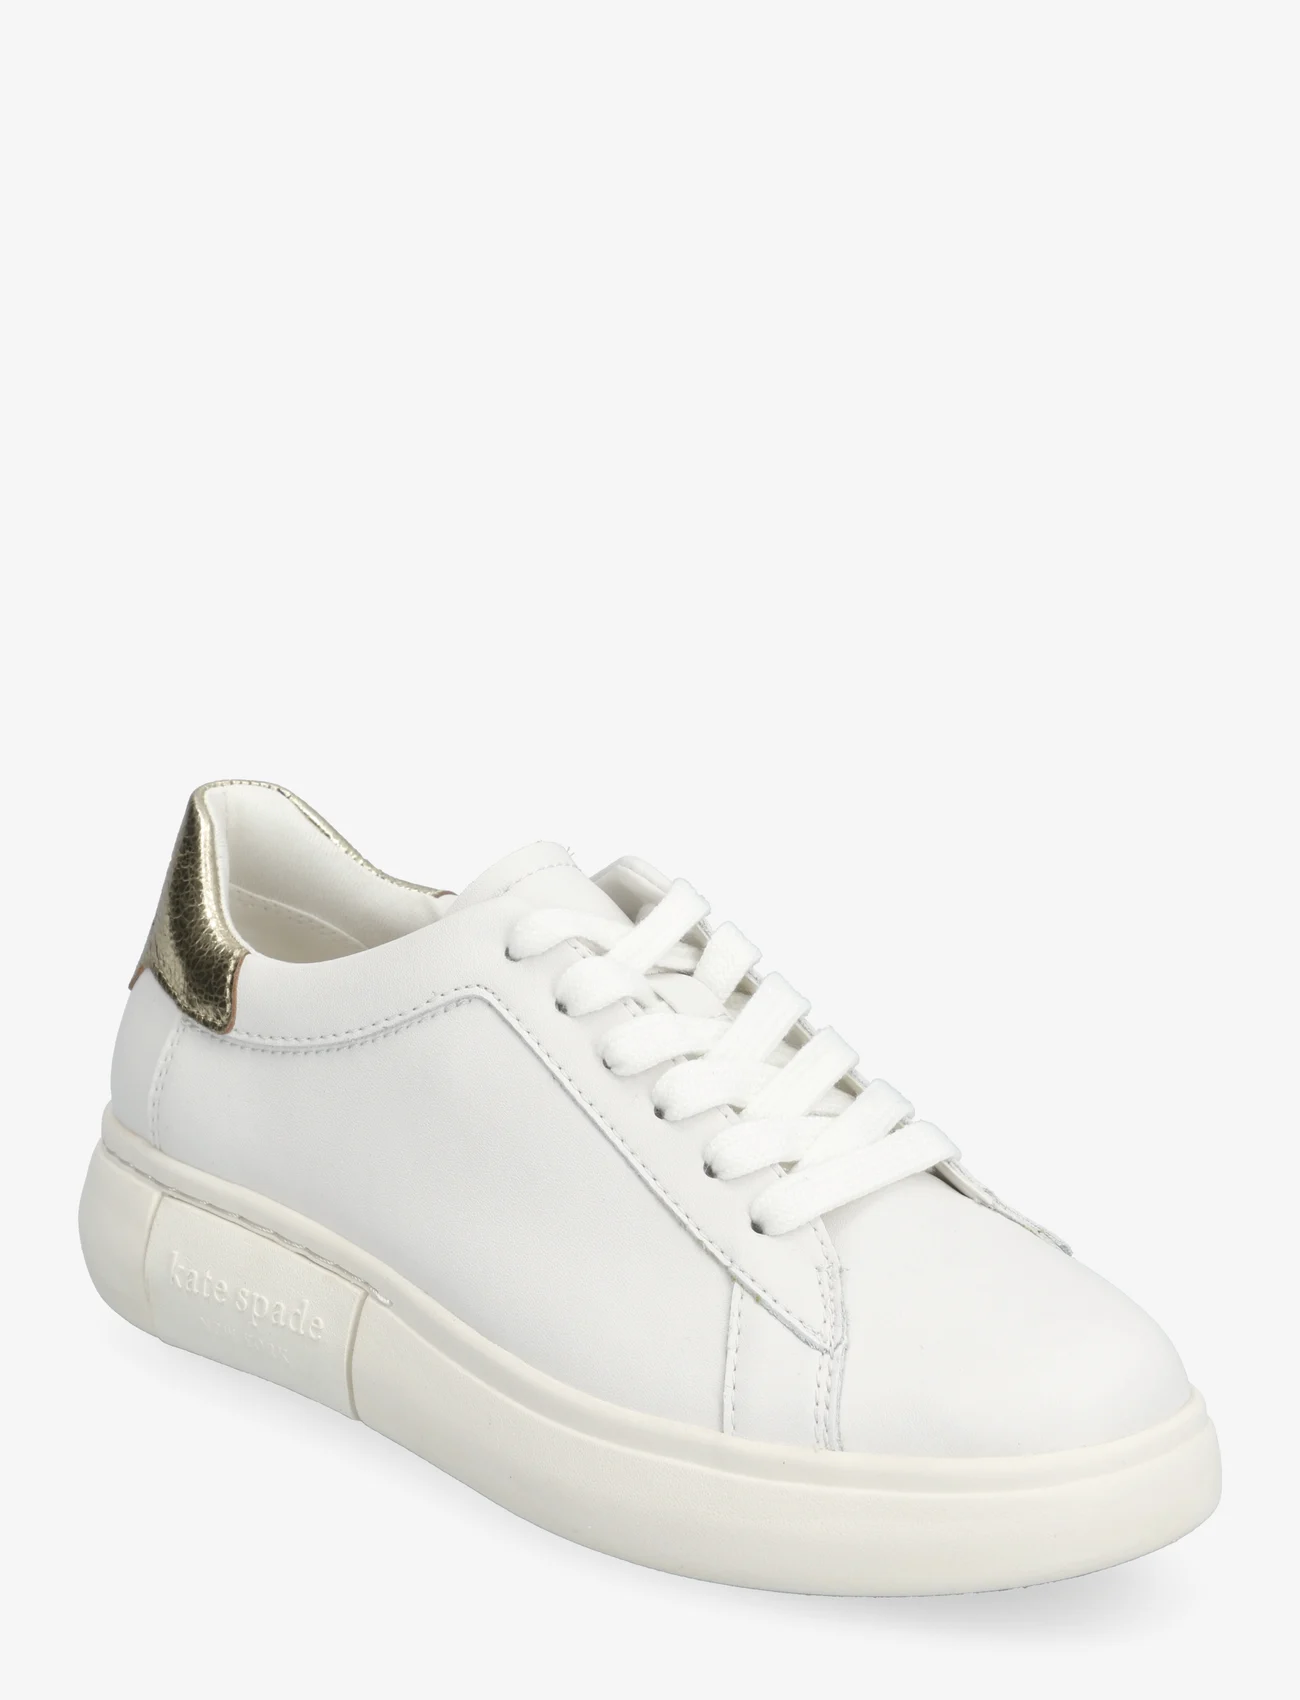 Kate Spade - LIFT - lave sneakers - optic white/pale gold - 0